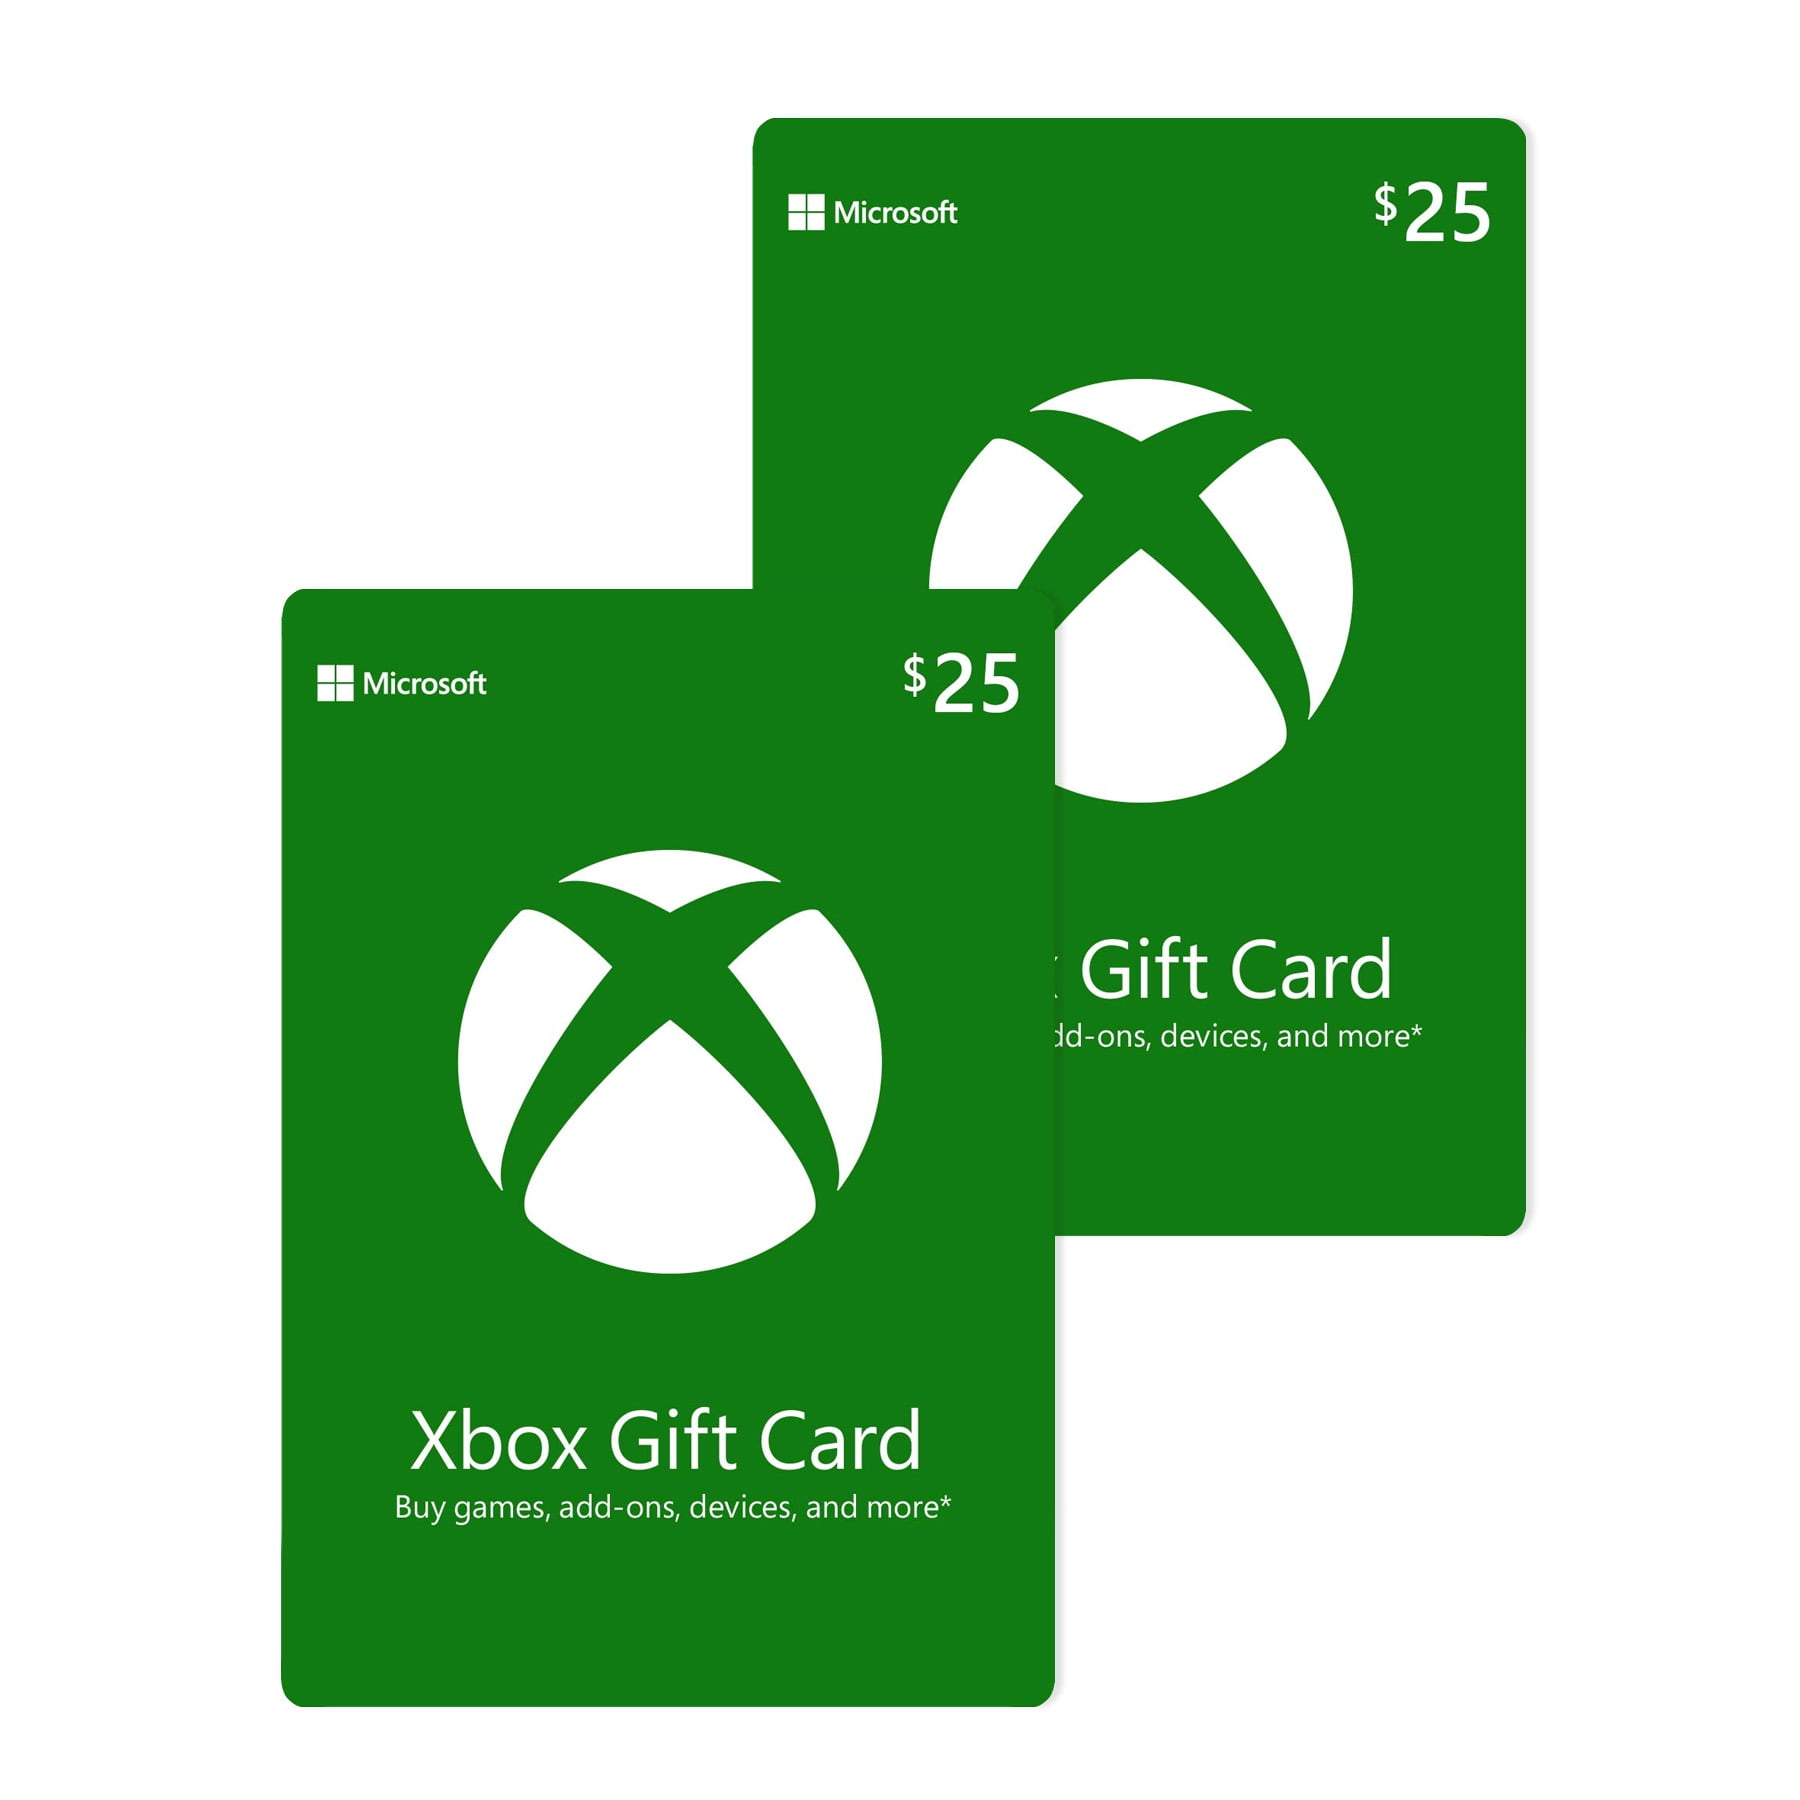 You can no longer buy Xbox gift cards using  Gift Cards or